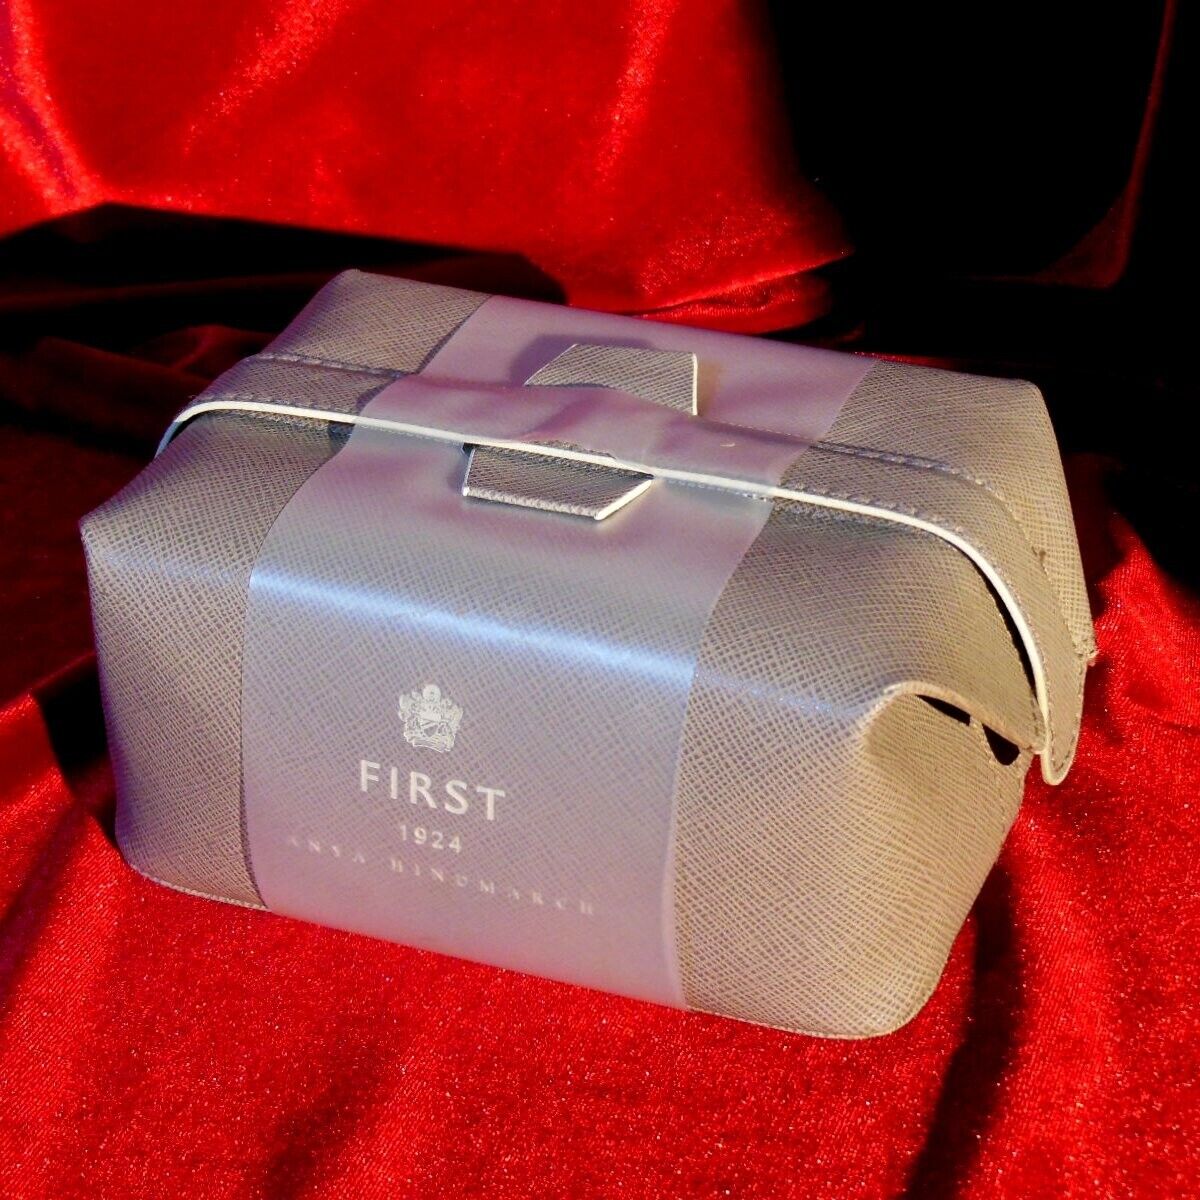 Anya Hindmarch : British Airways : First Class: 1924 Limited Edition Amenity Kit